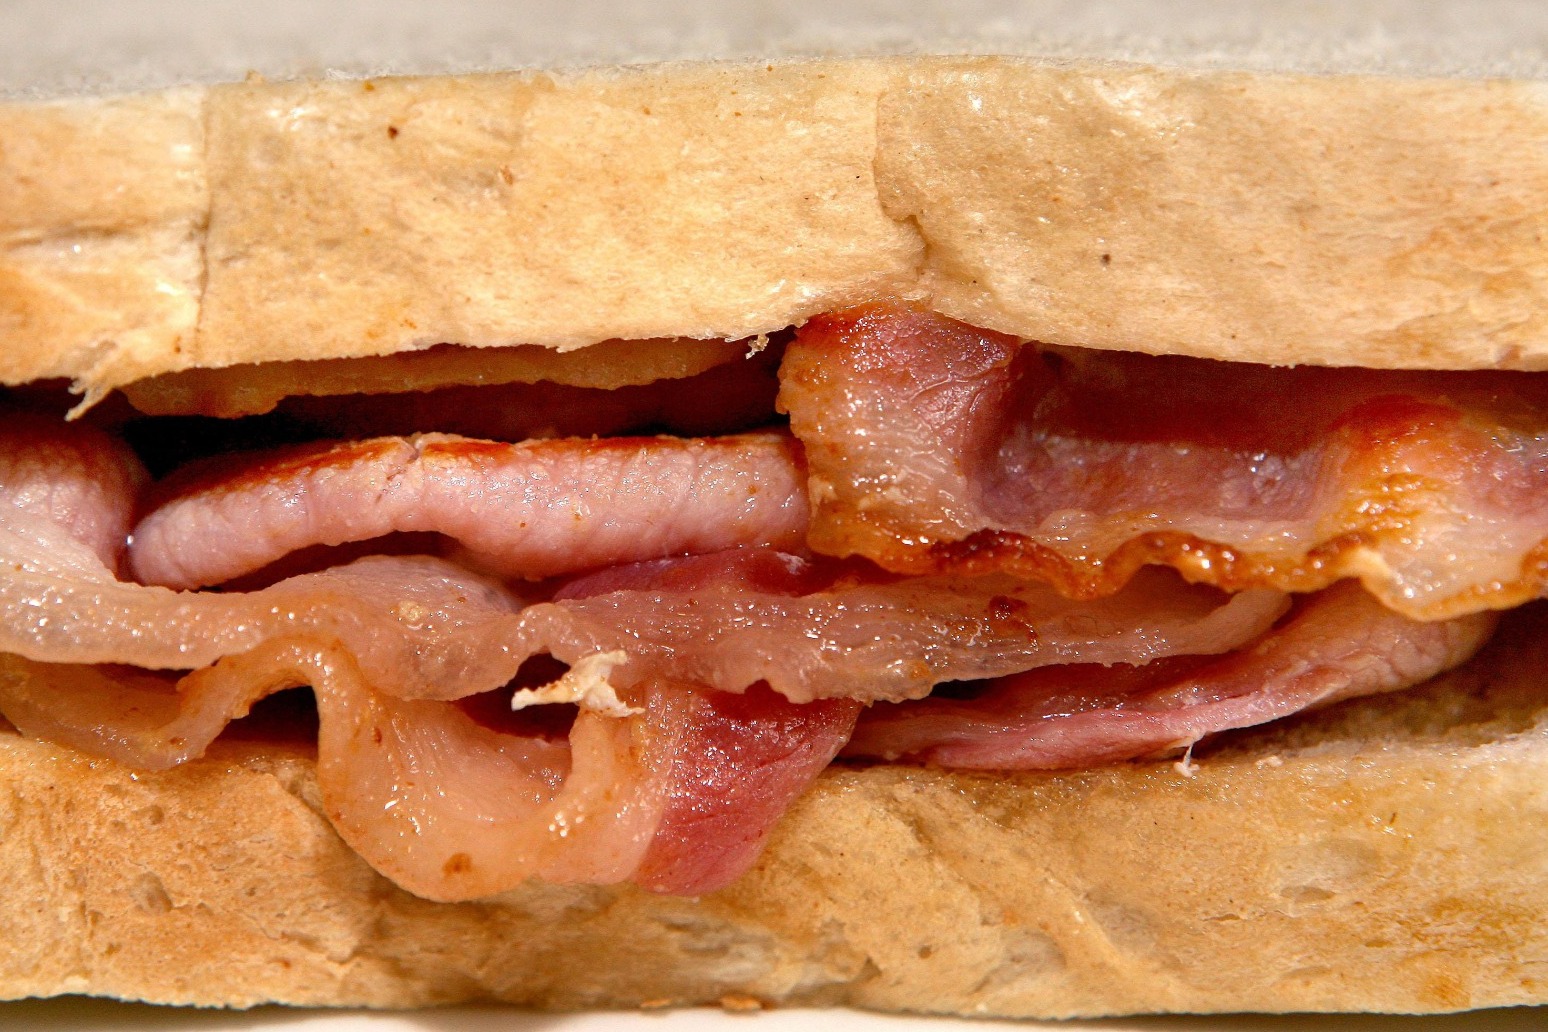 NOT ALL PROCESSED MEAT HAS THE SAME CANCER RISK - STUDY 